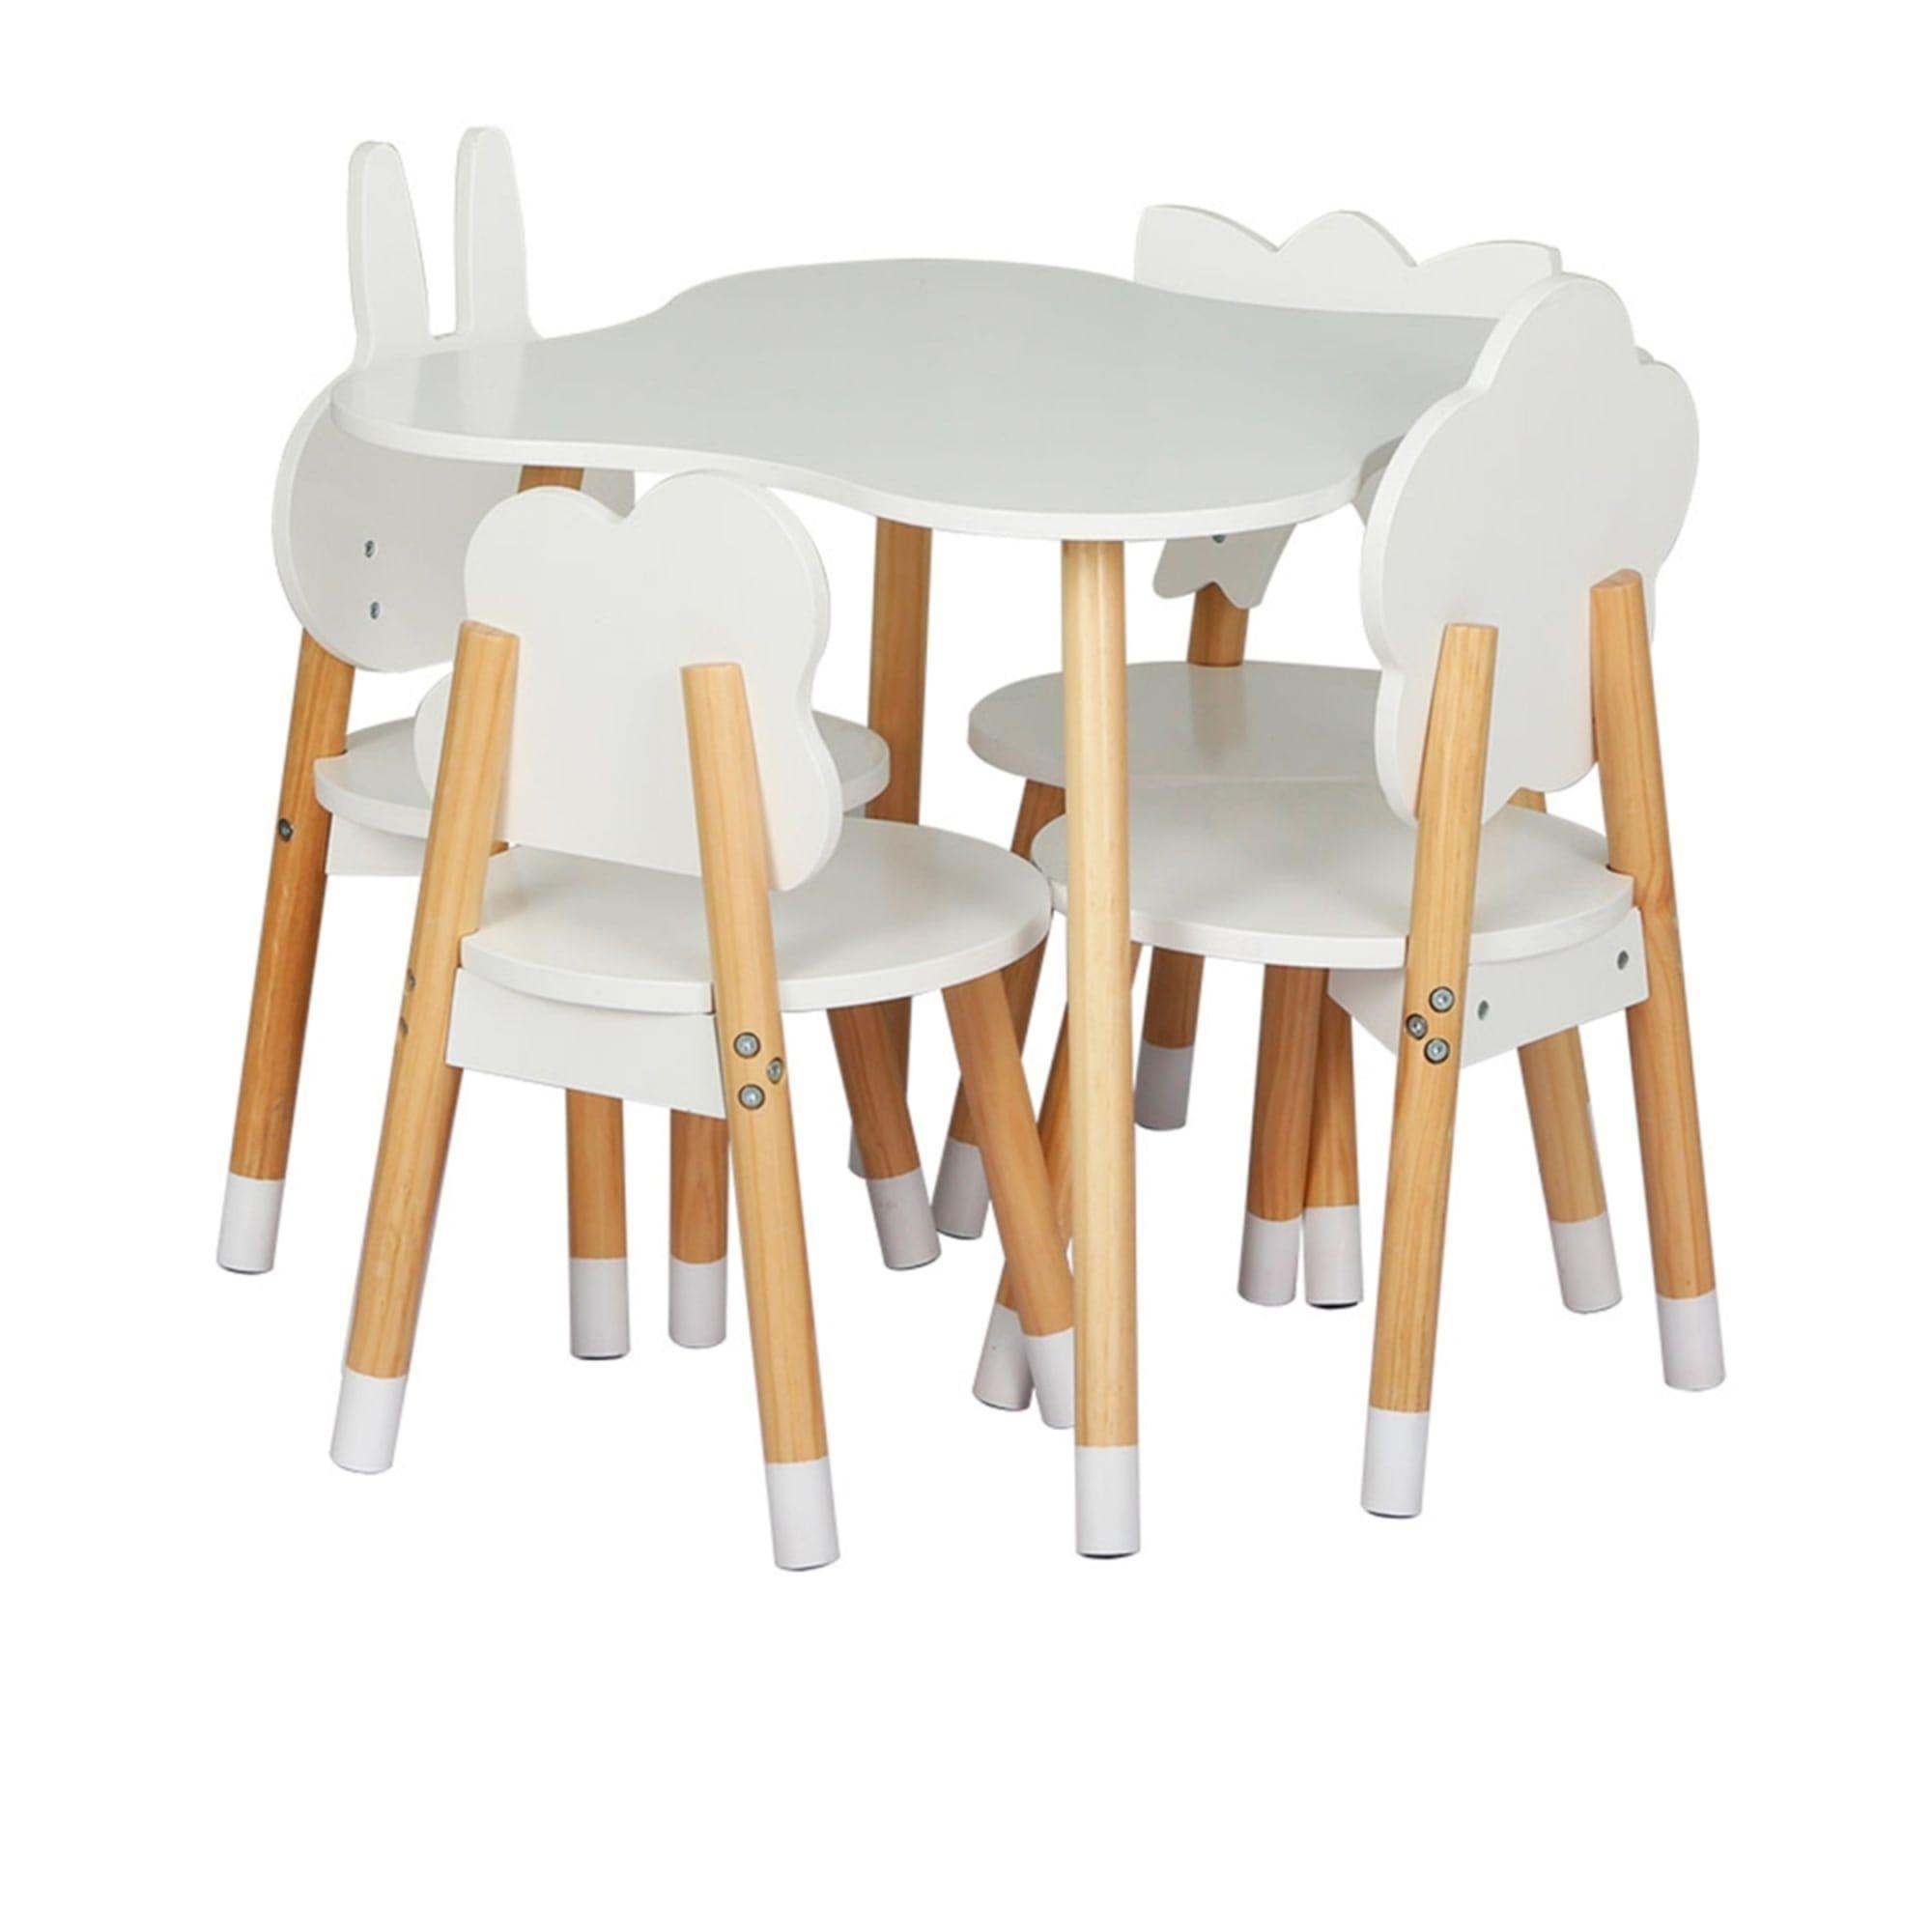 Keezi Kids Table and Chairs Set 5pc Image 3